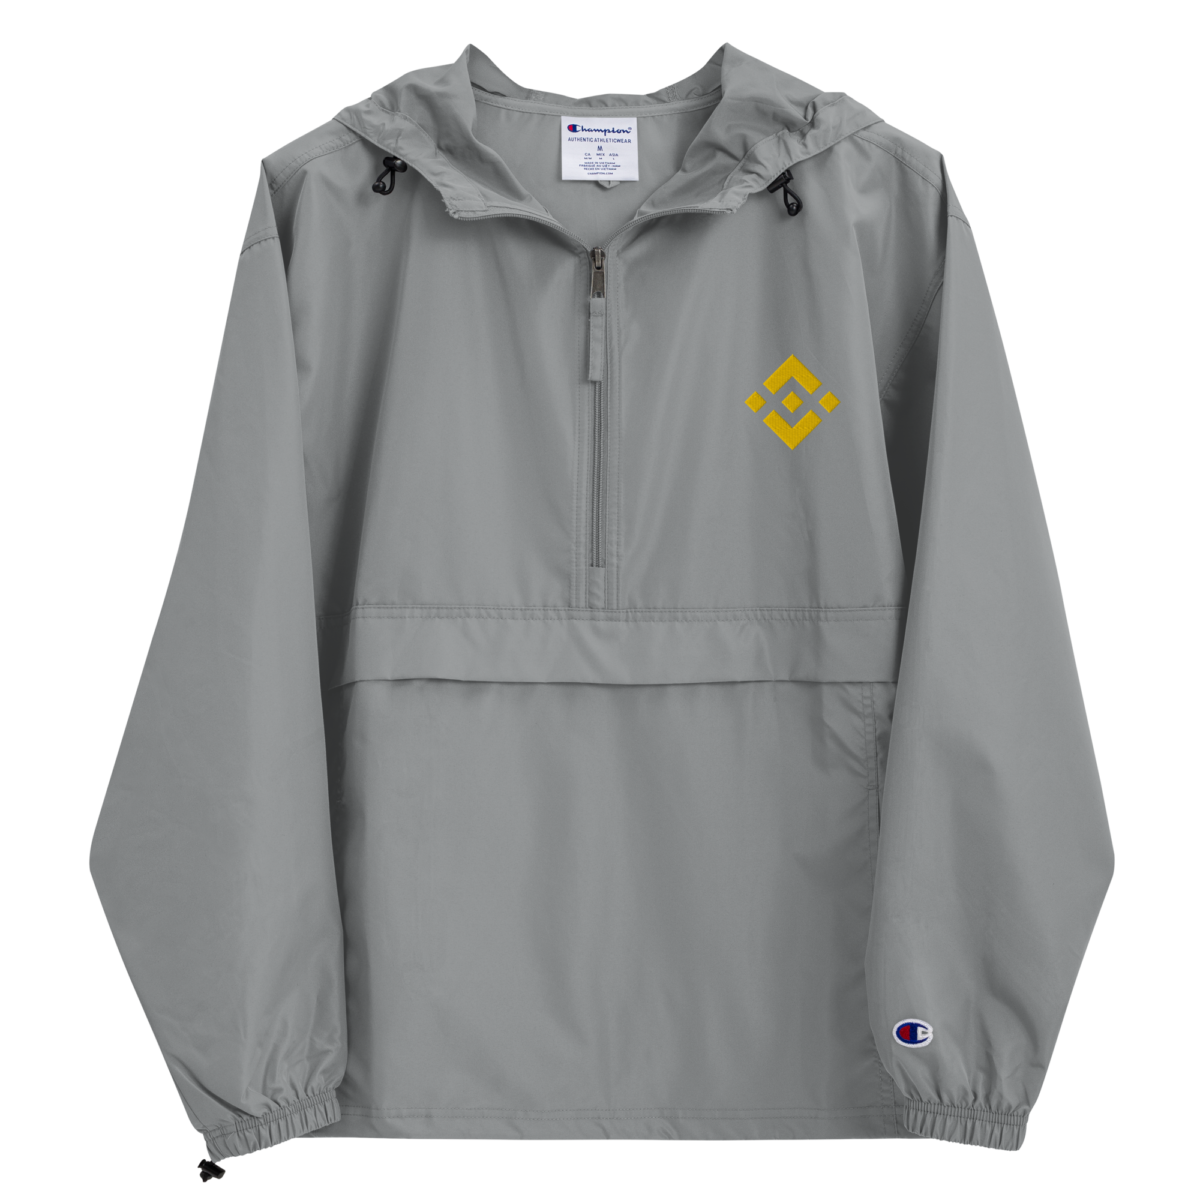 embroidered champion packable jacket graphite front 631f401a84fb9 - Binance (BNB) Champion Packable Jacket